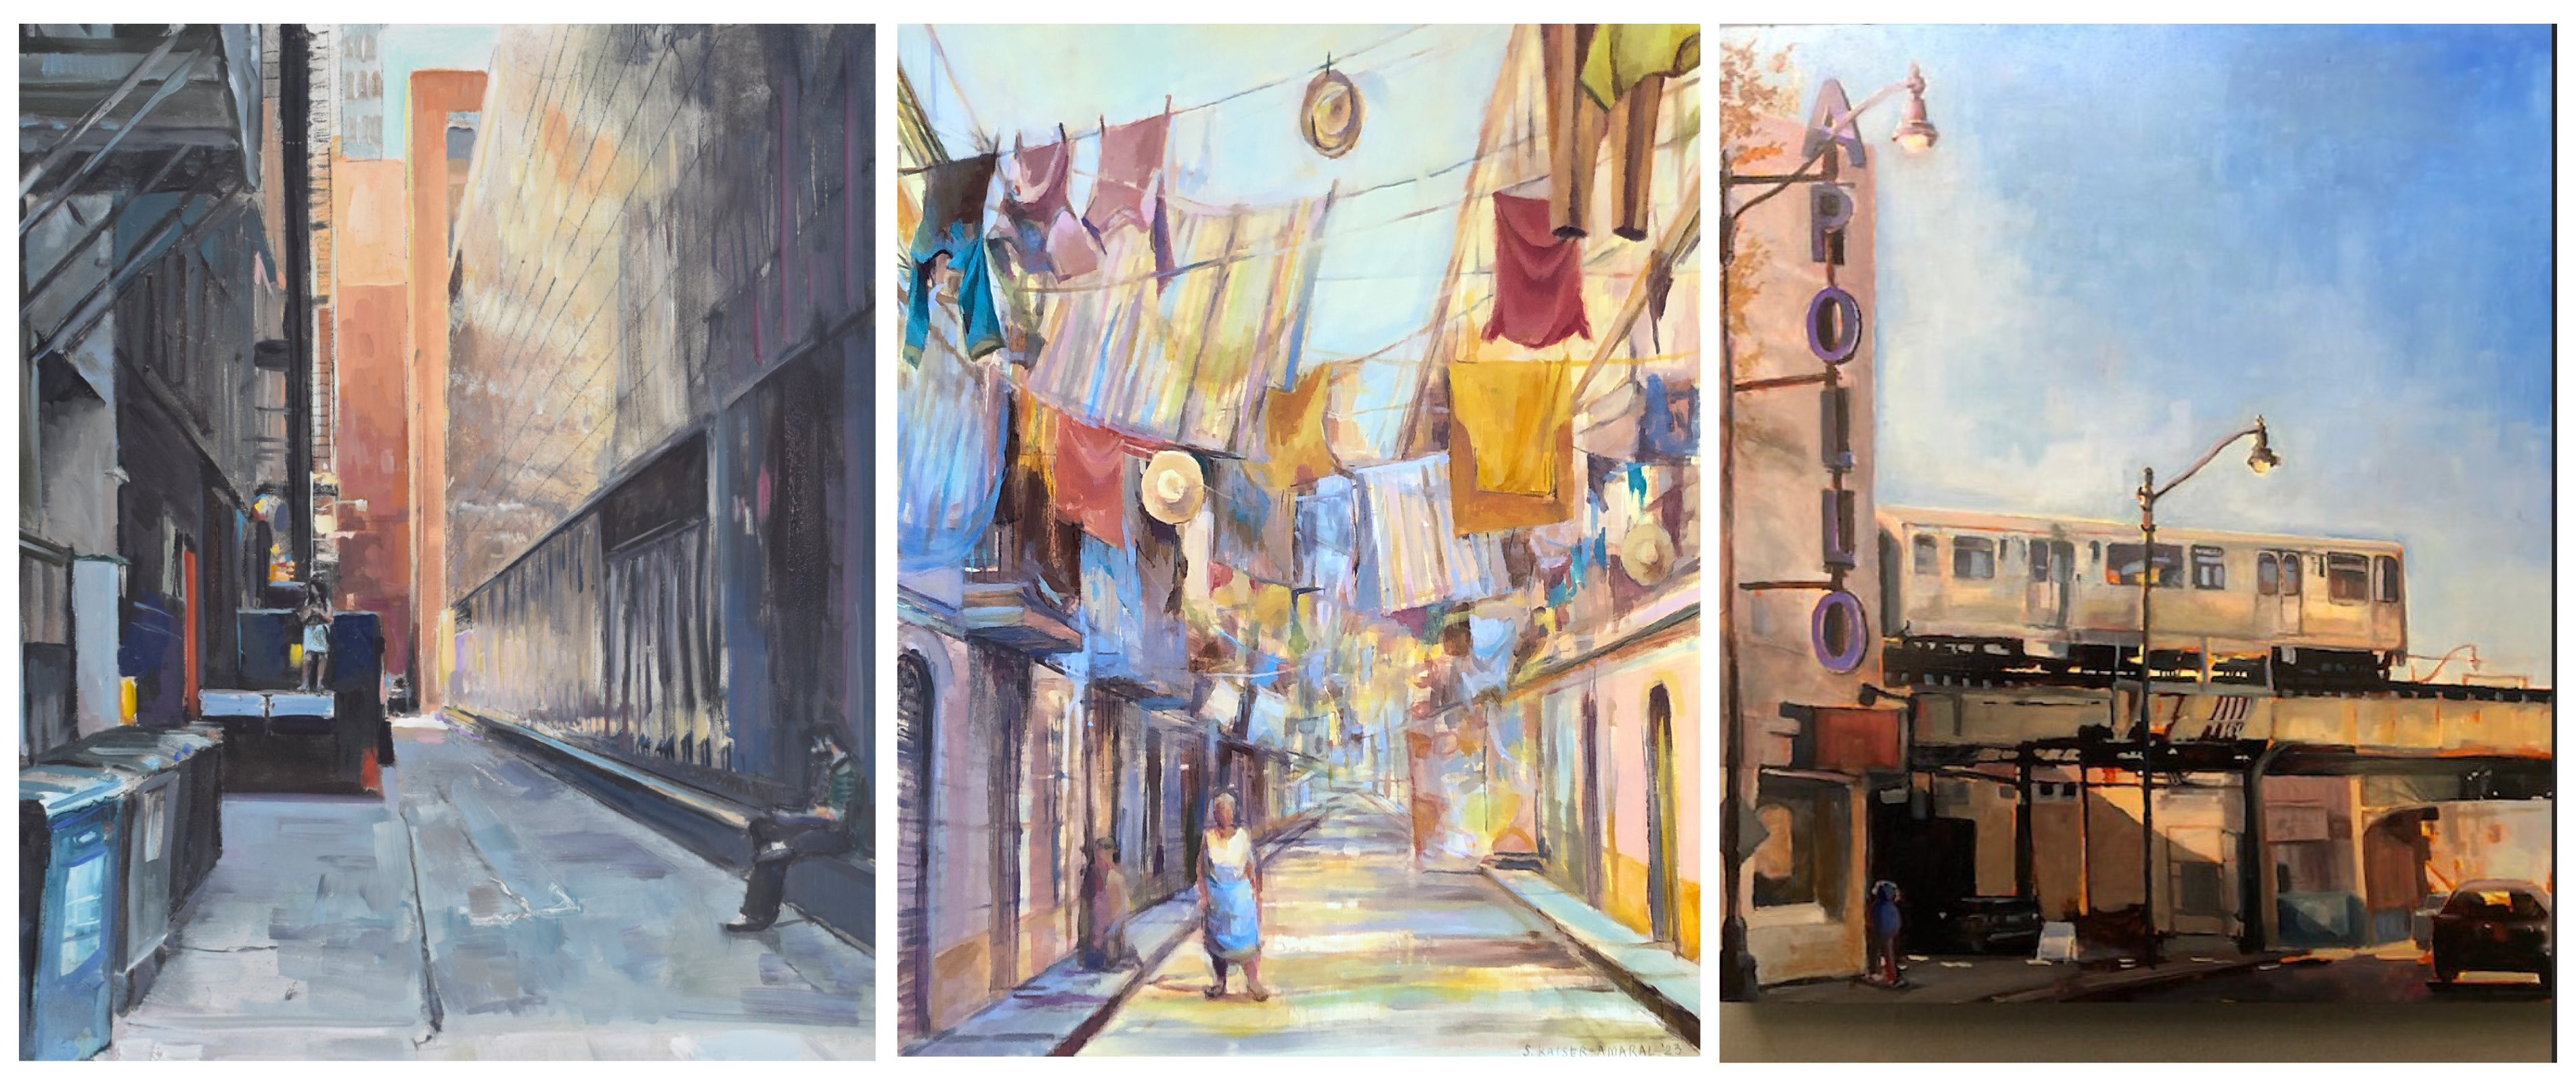 Three paintings: Left most of and alley, middle o street view of Barcelona, Right most a blue sky and the Apollo theater sign